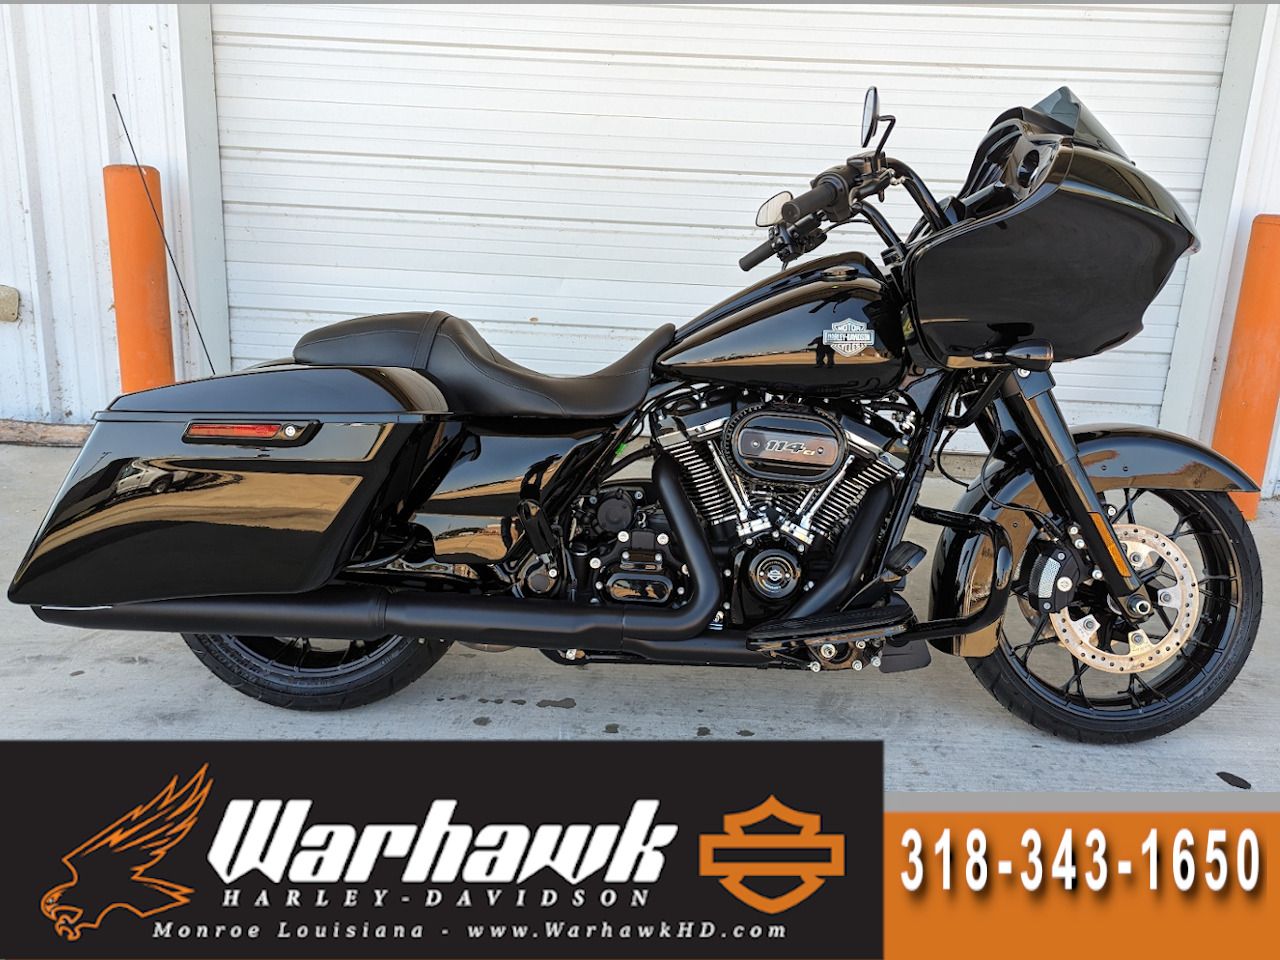 2023 harley davidson road glide special black edition for sale near me - Photo 1